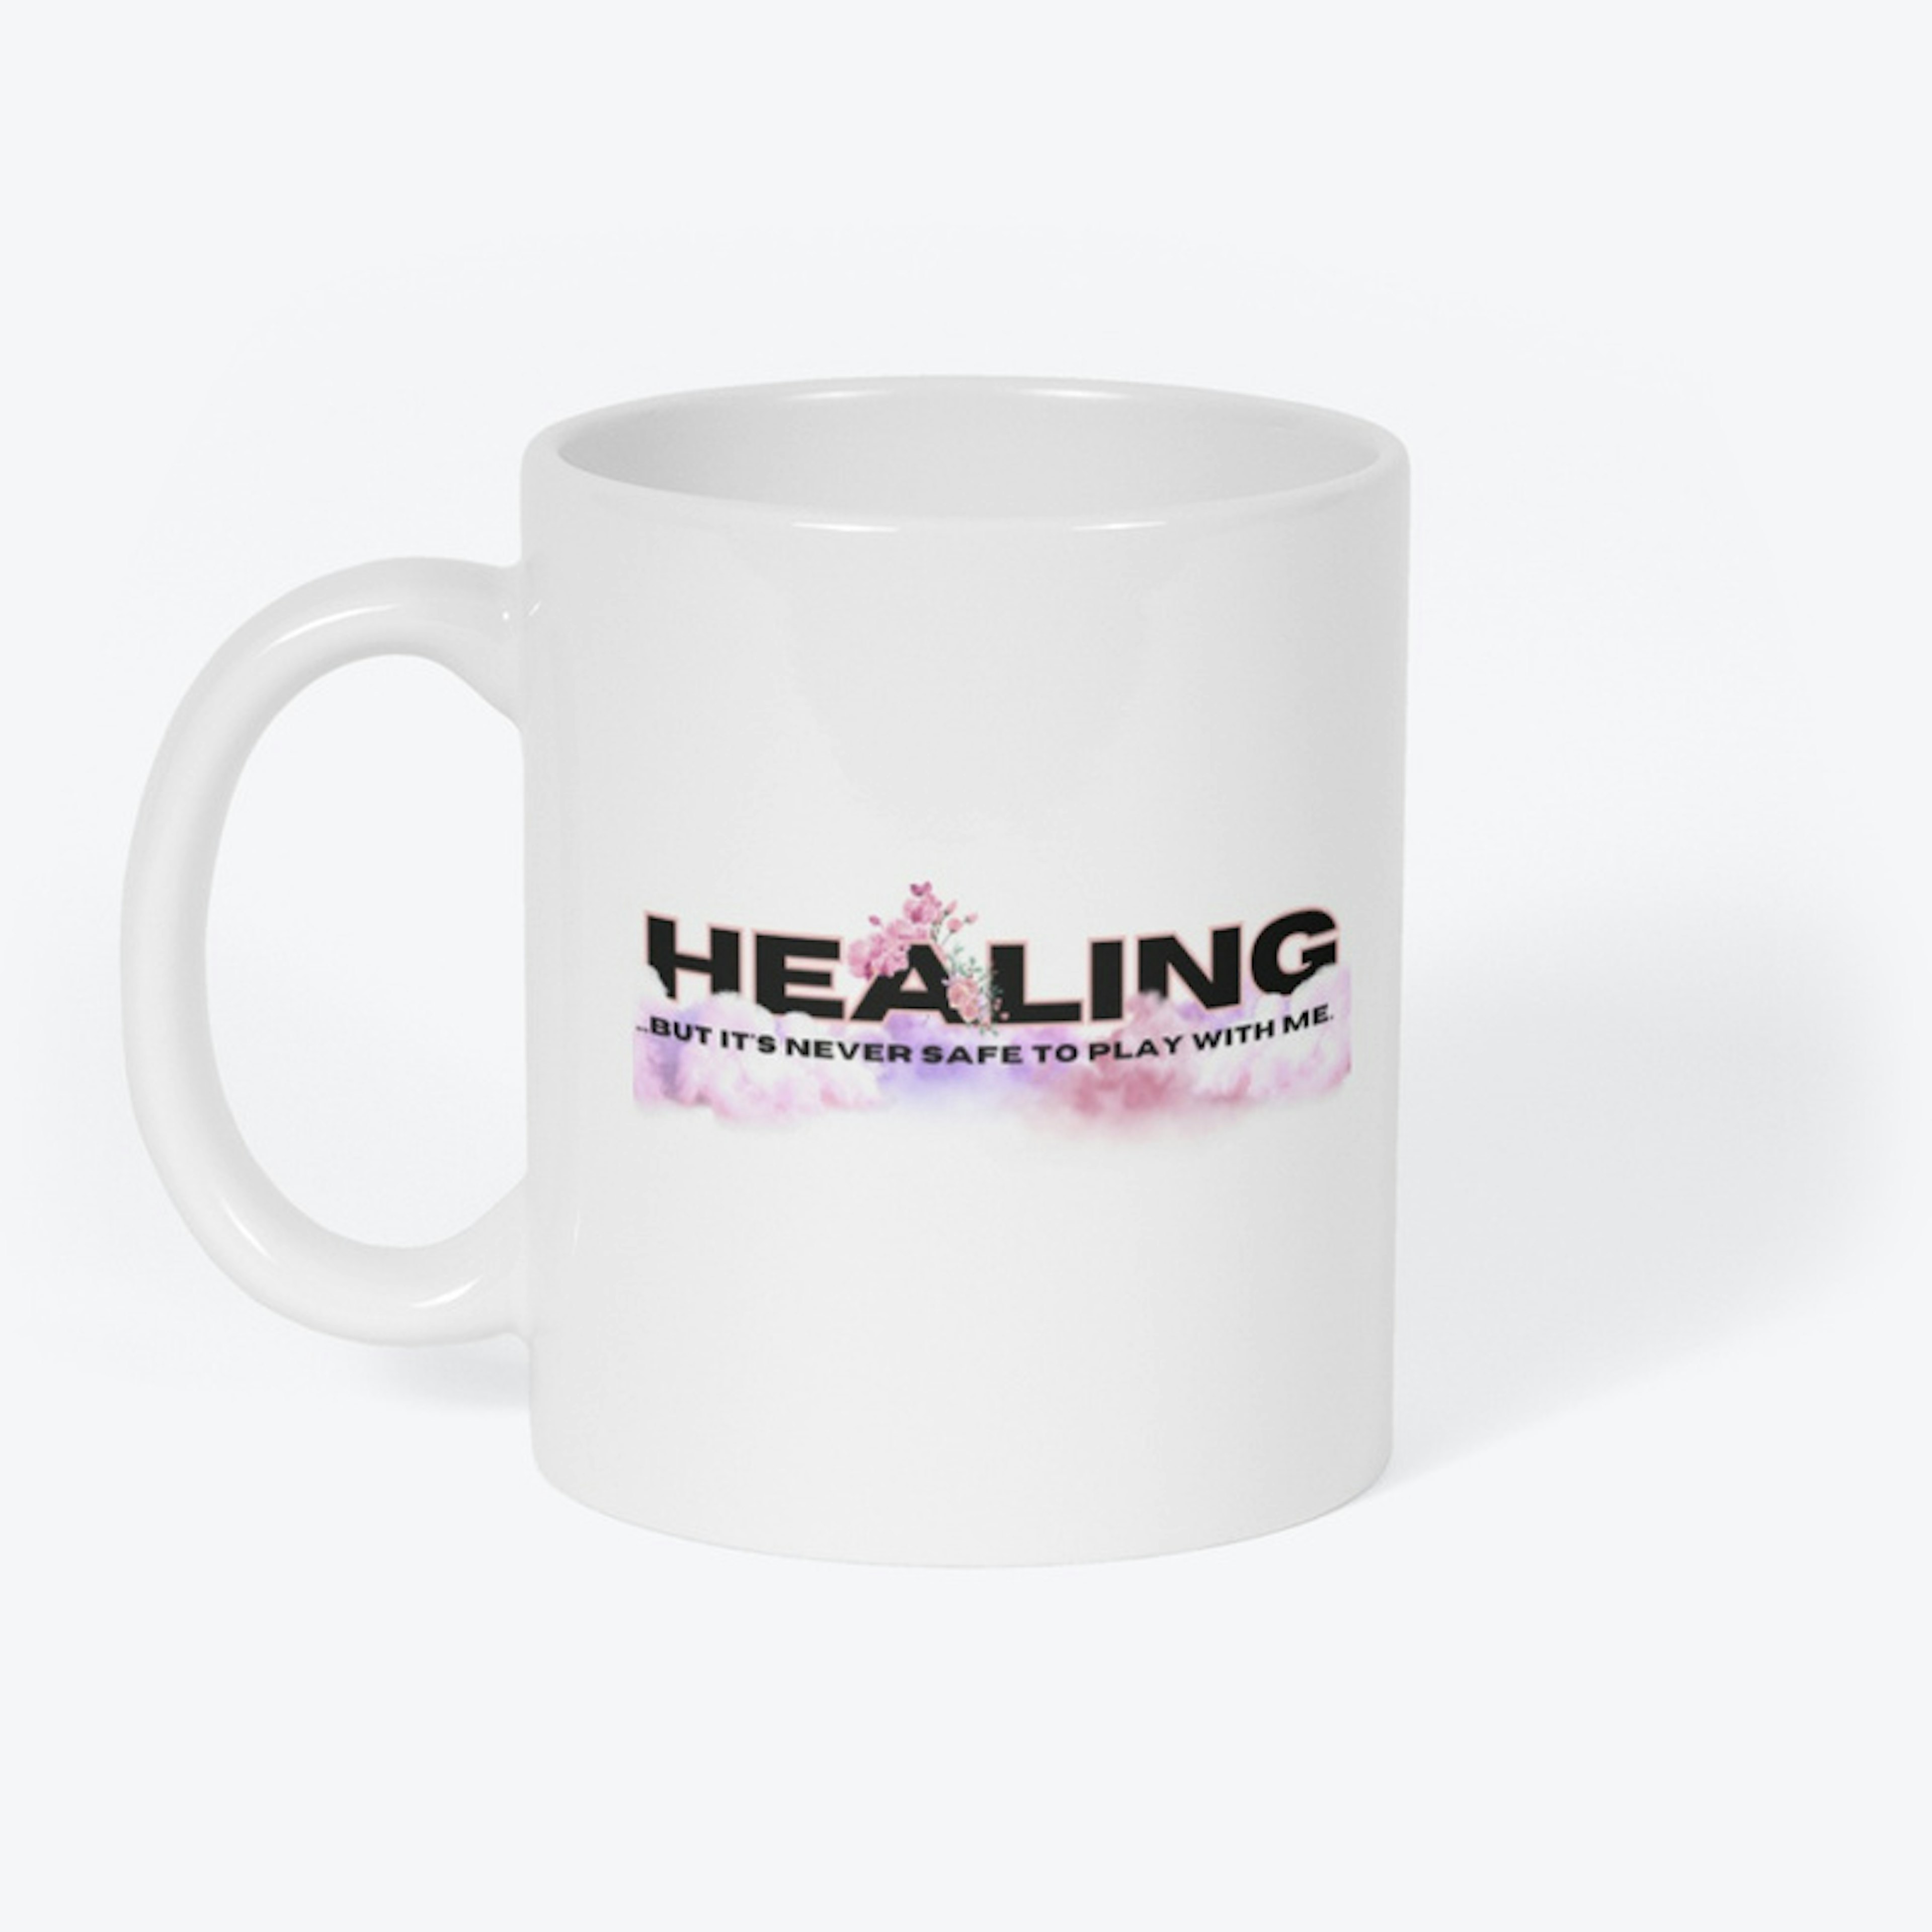 Healing, but don't play with me.